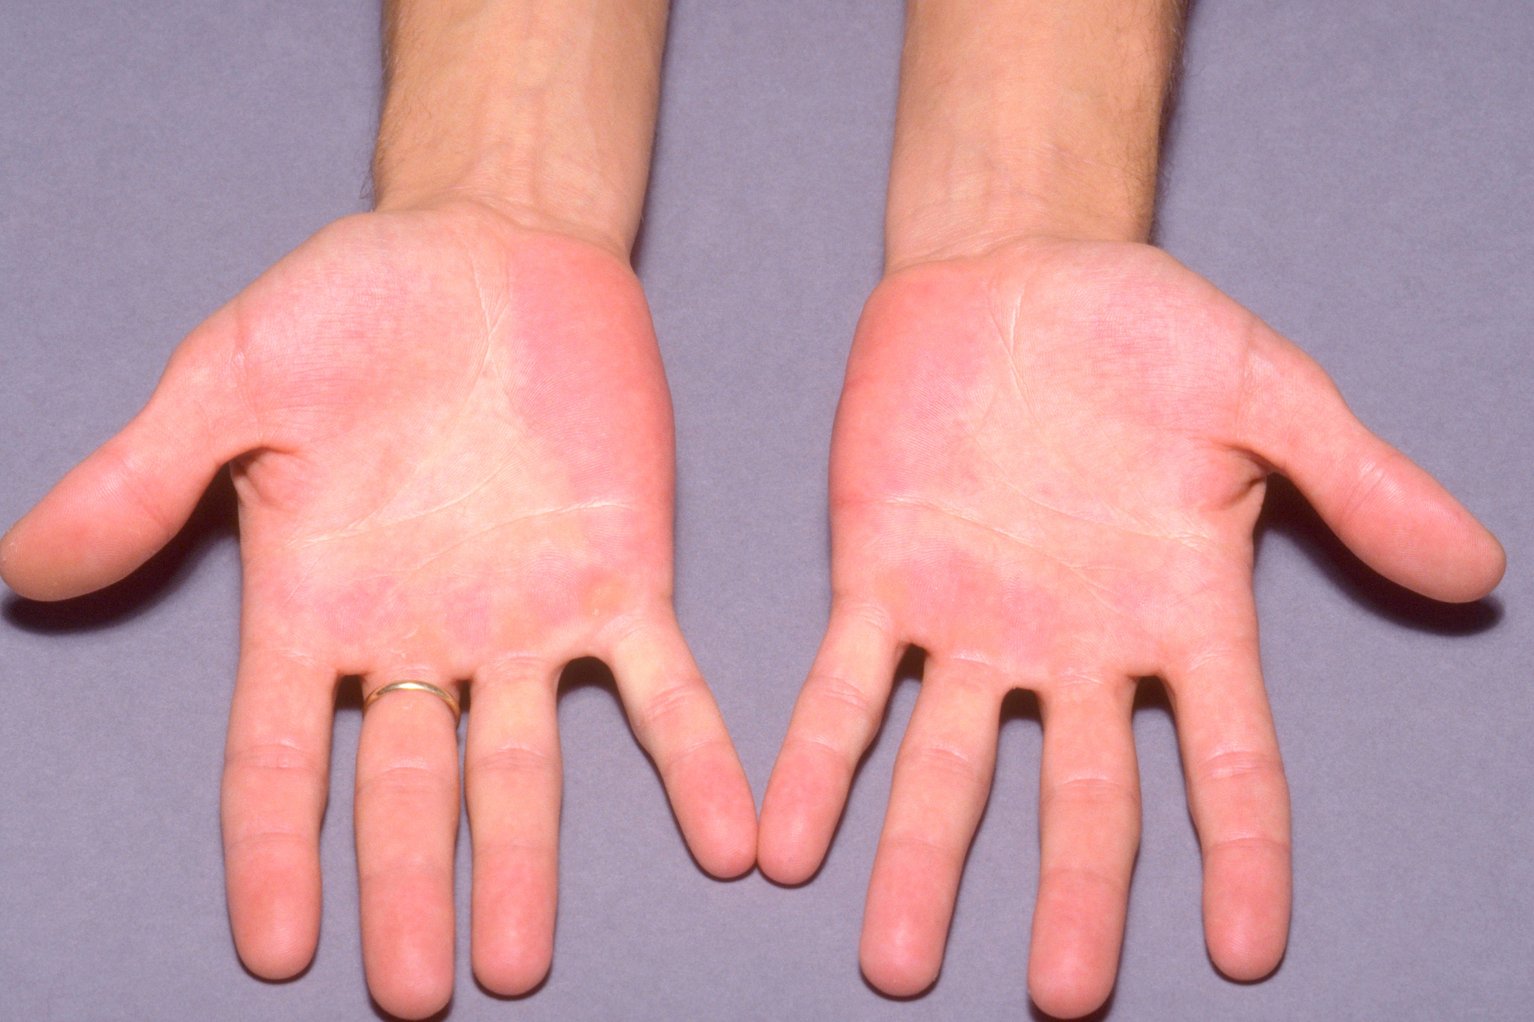 symptoms of pins and needles in hands and feet